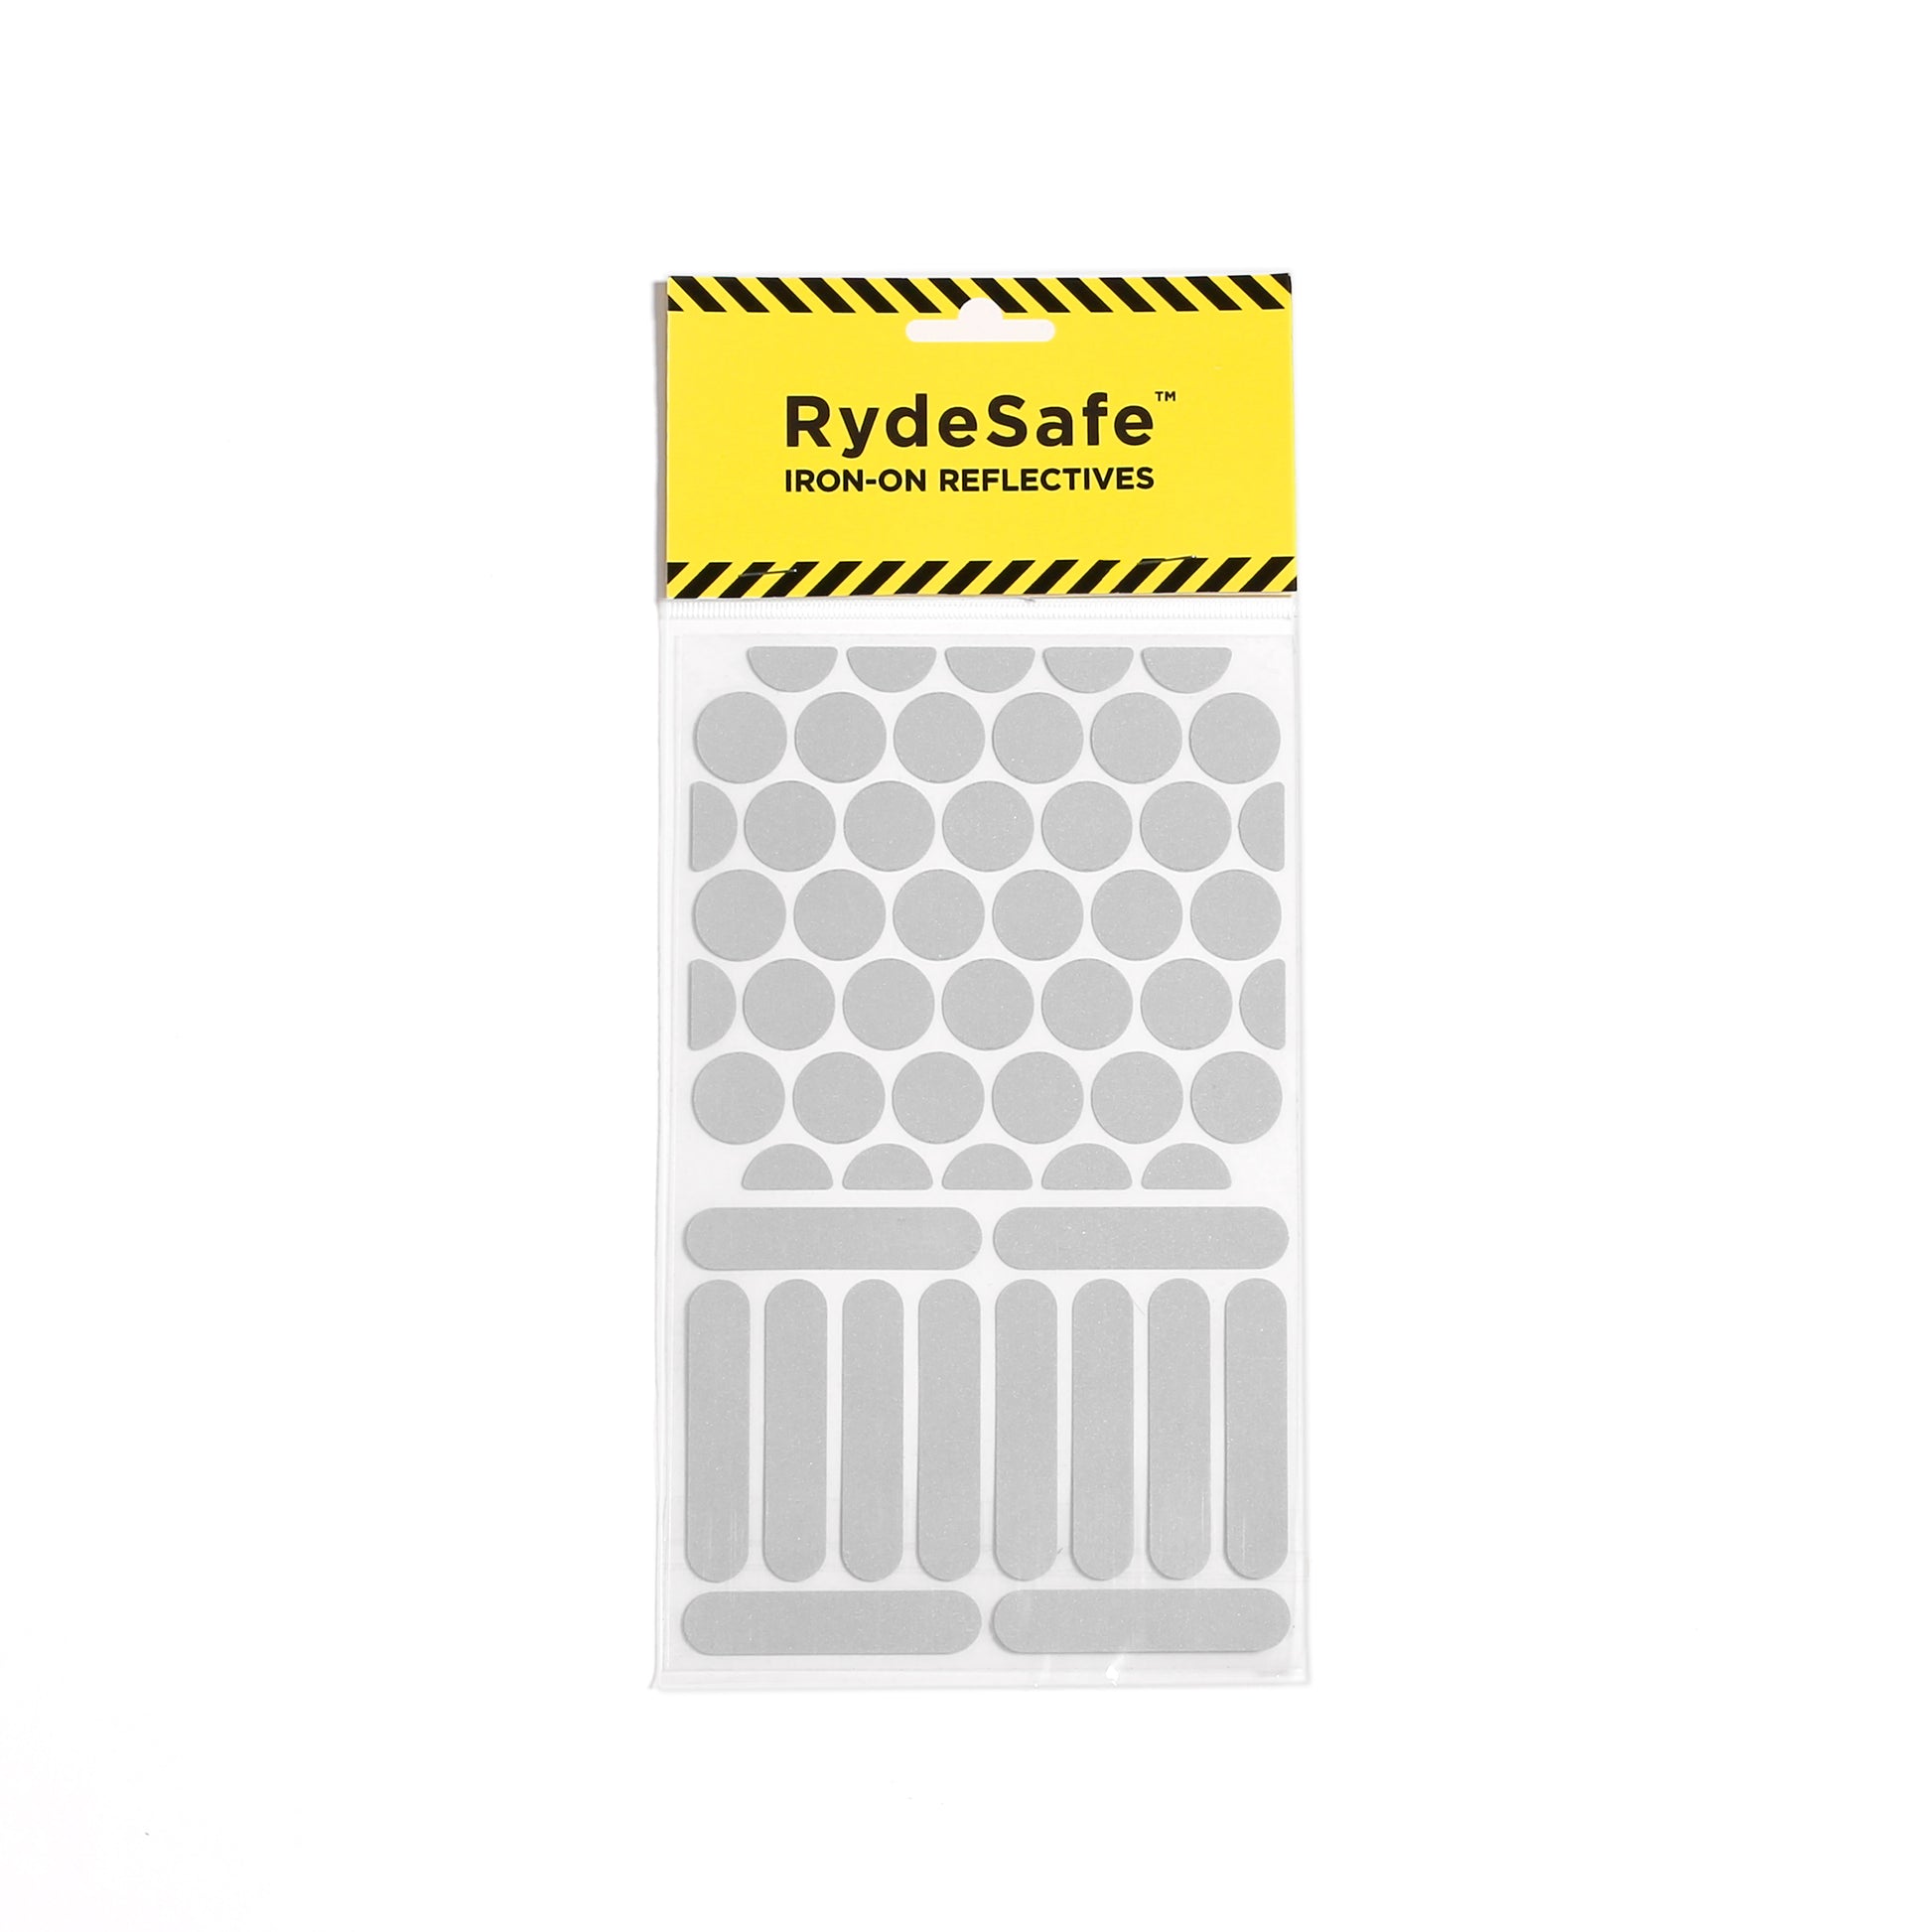 RydeSafe reflective iron-on decals made with 3M heat-applied transfer tape